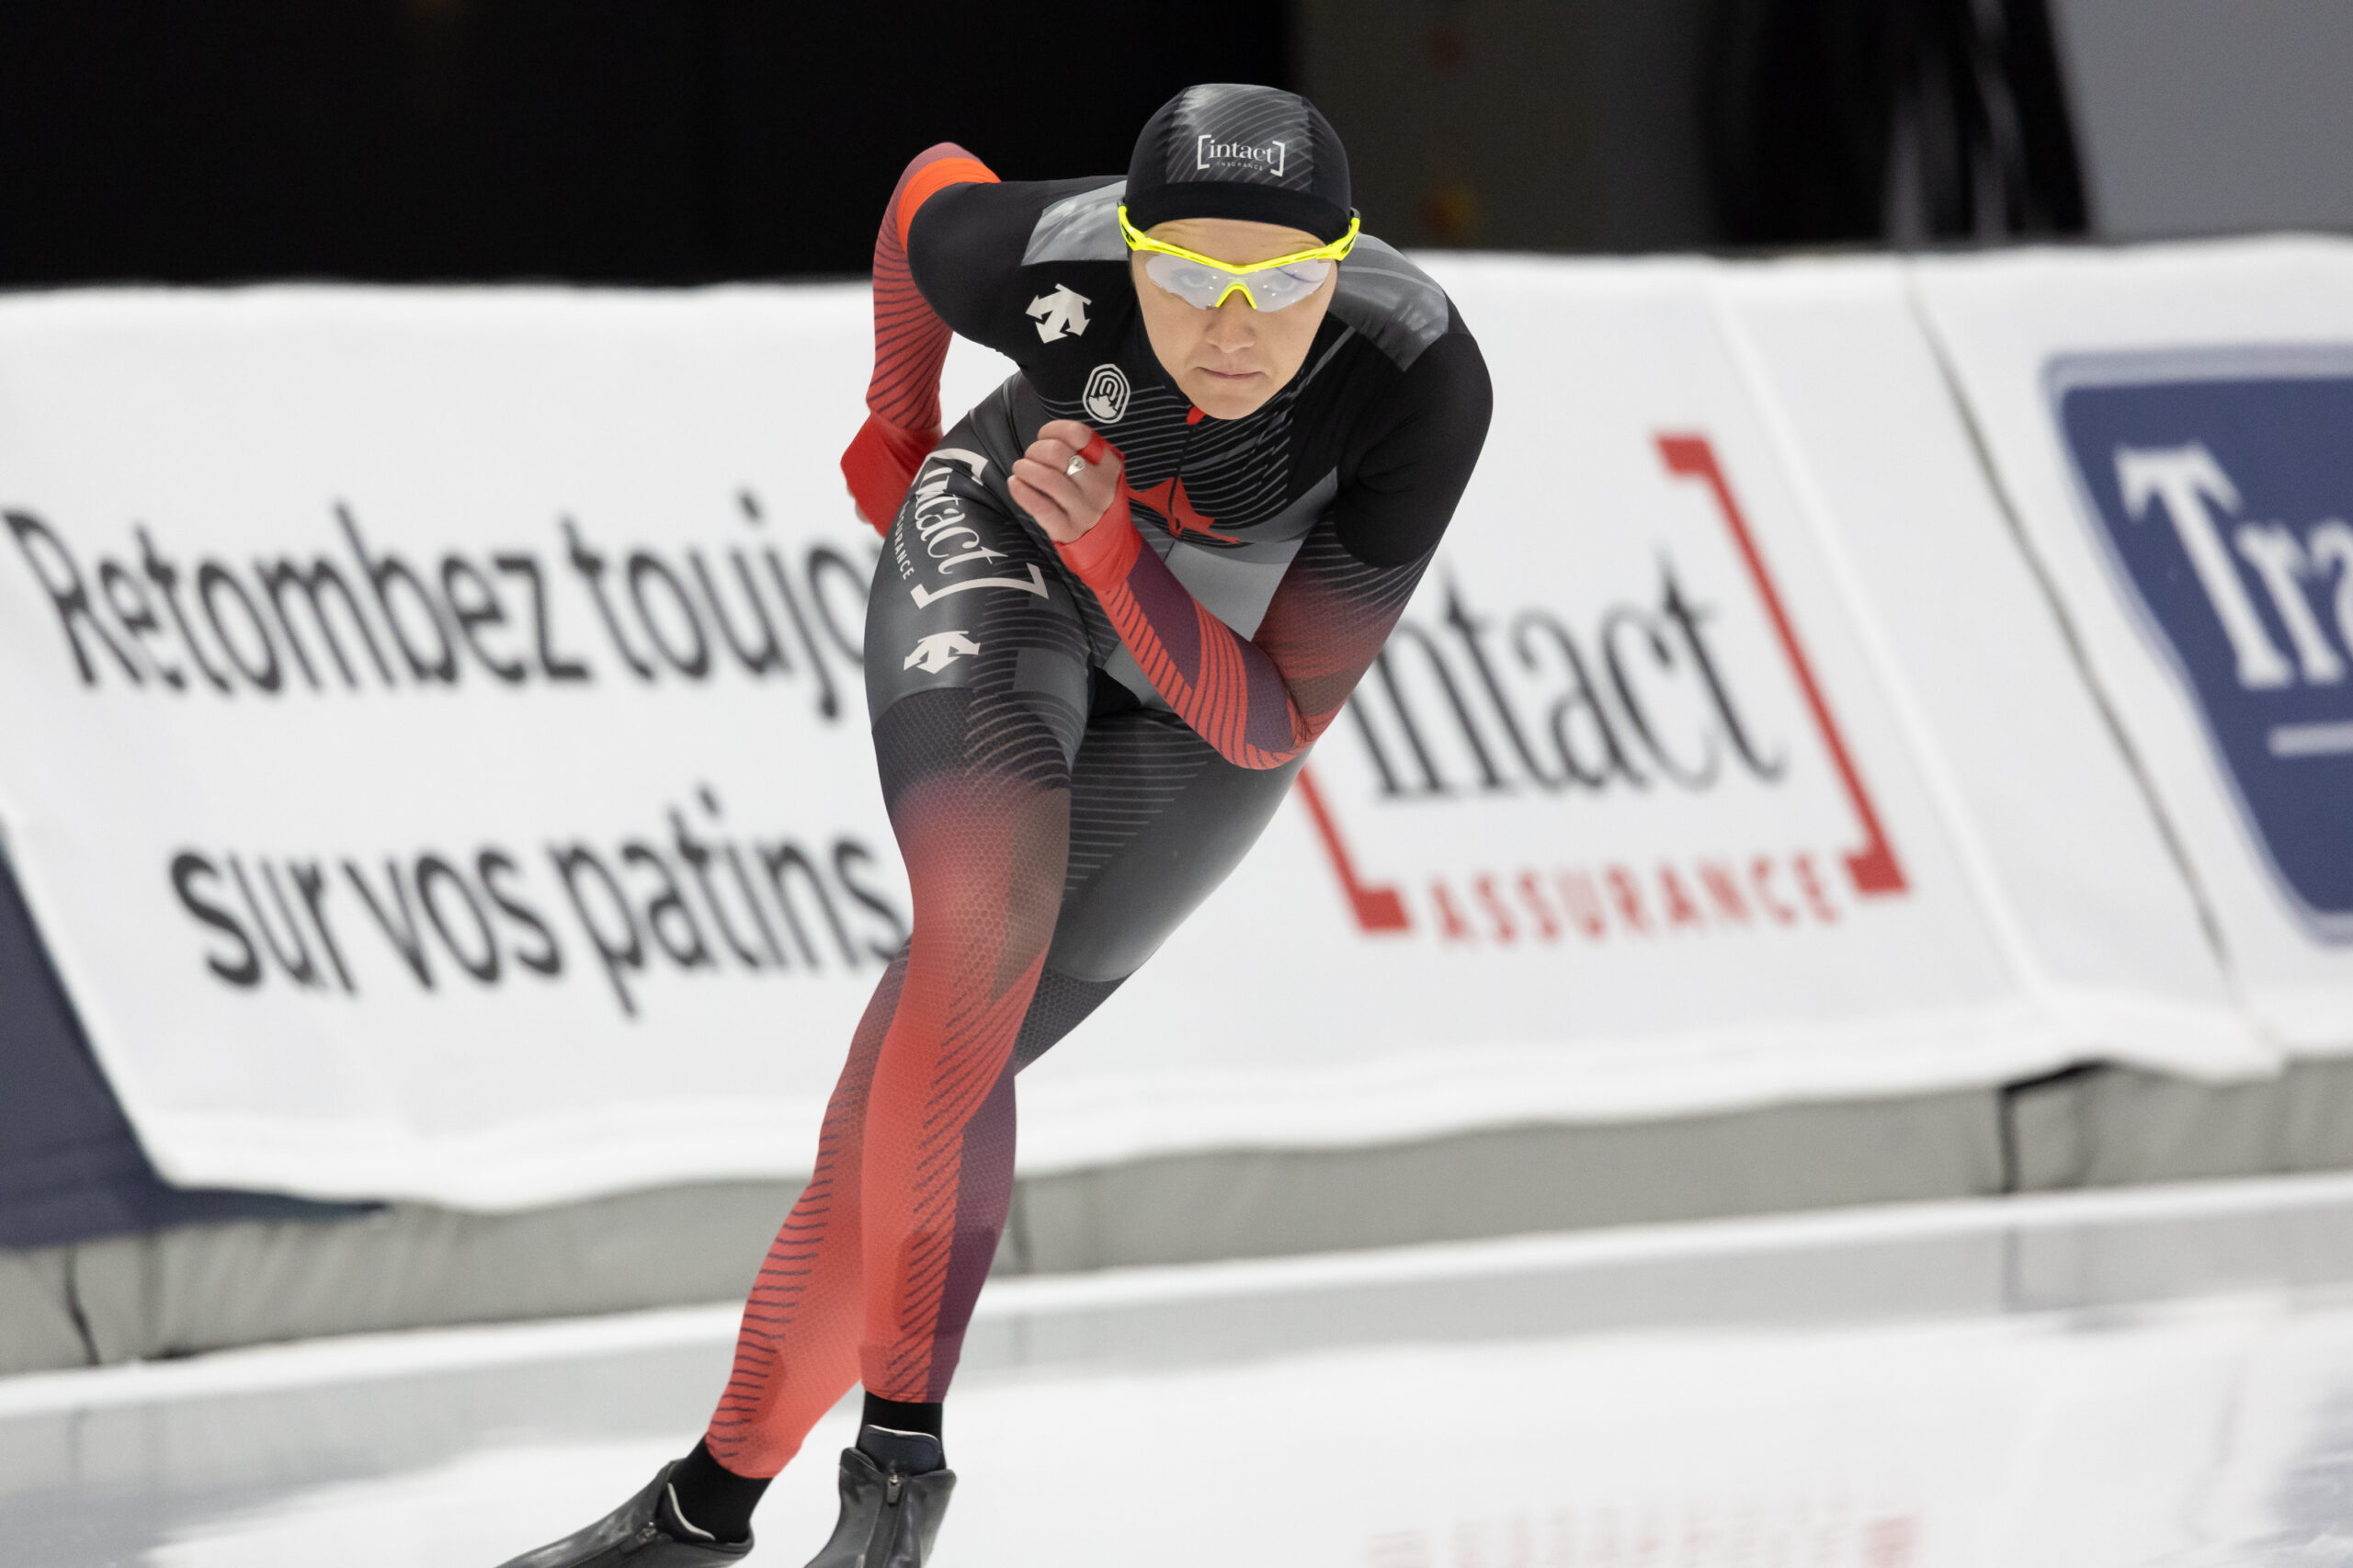 Isabelle Weidemann, Laurent Dubreuil and Ted-Jan Bloemen atop the Canadian Championships podium for second consecutive day